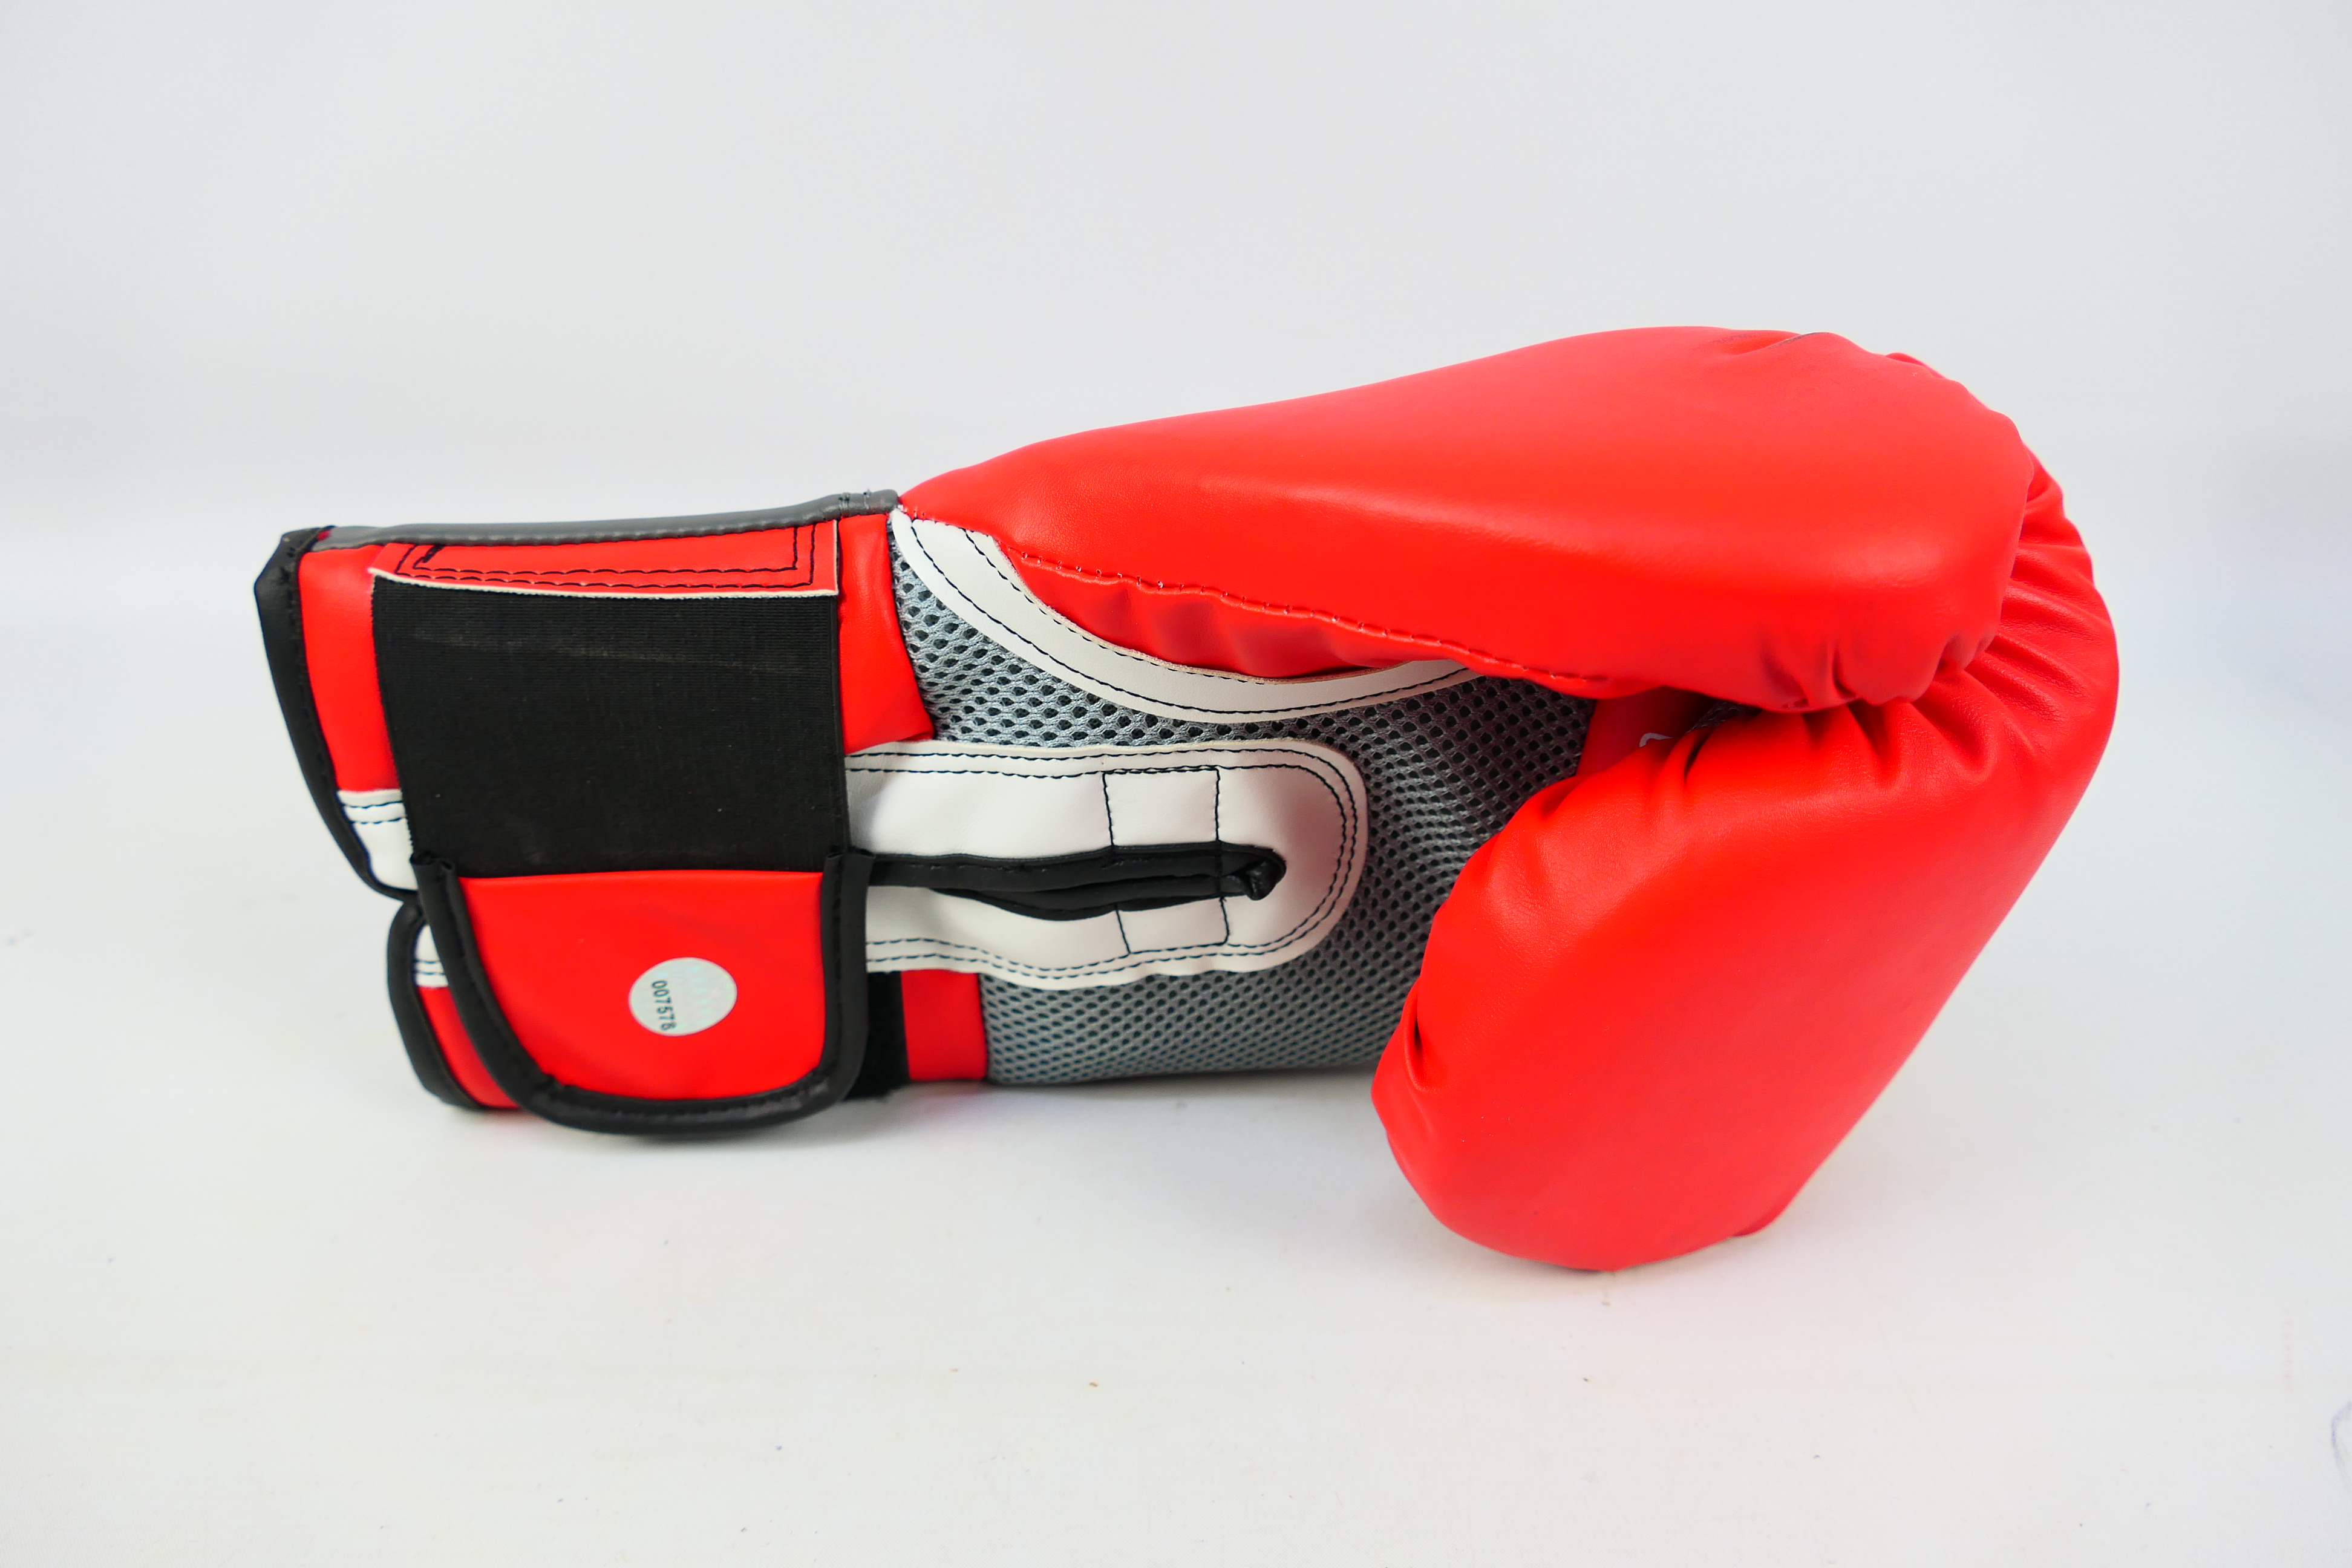 Boxing Interest - A red Lonsdale boxing glove signed by Sugar Ray Leonard (Ray Charles Leonard) - Image 3 of 5